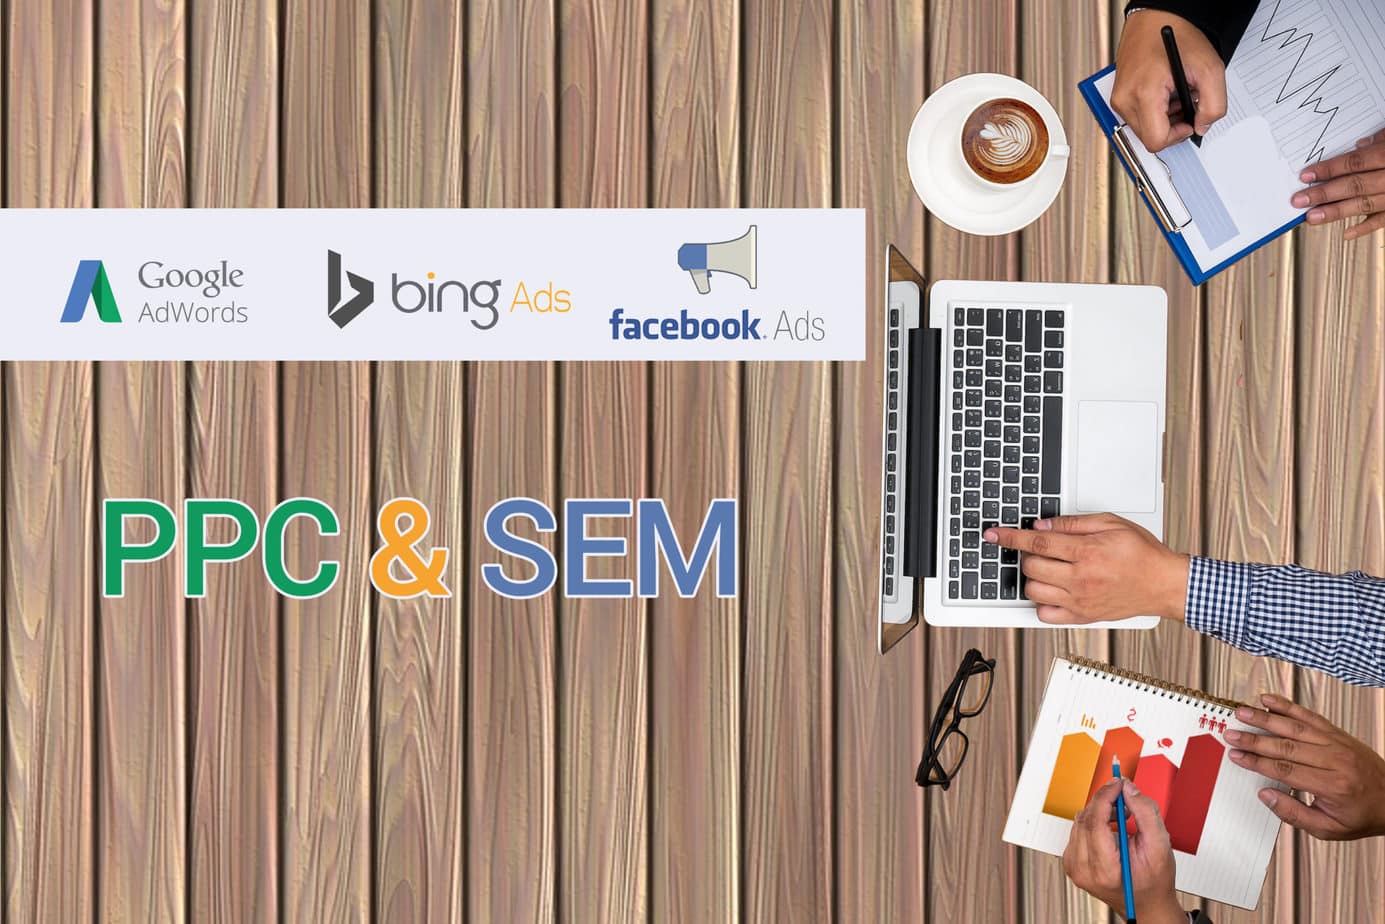 Pay Per Click & Search Engine Marketing Services